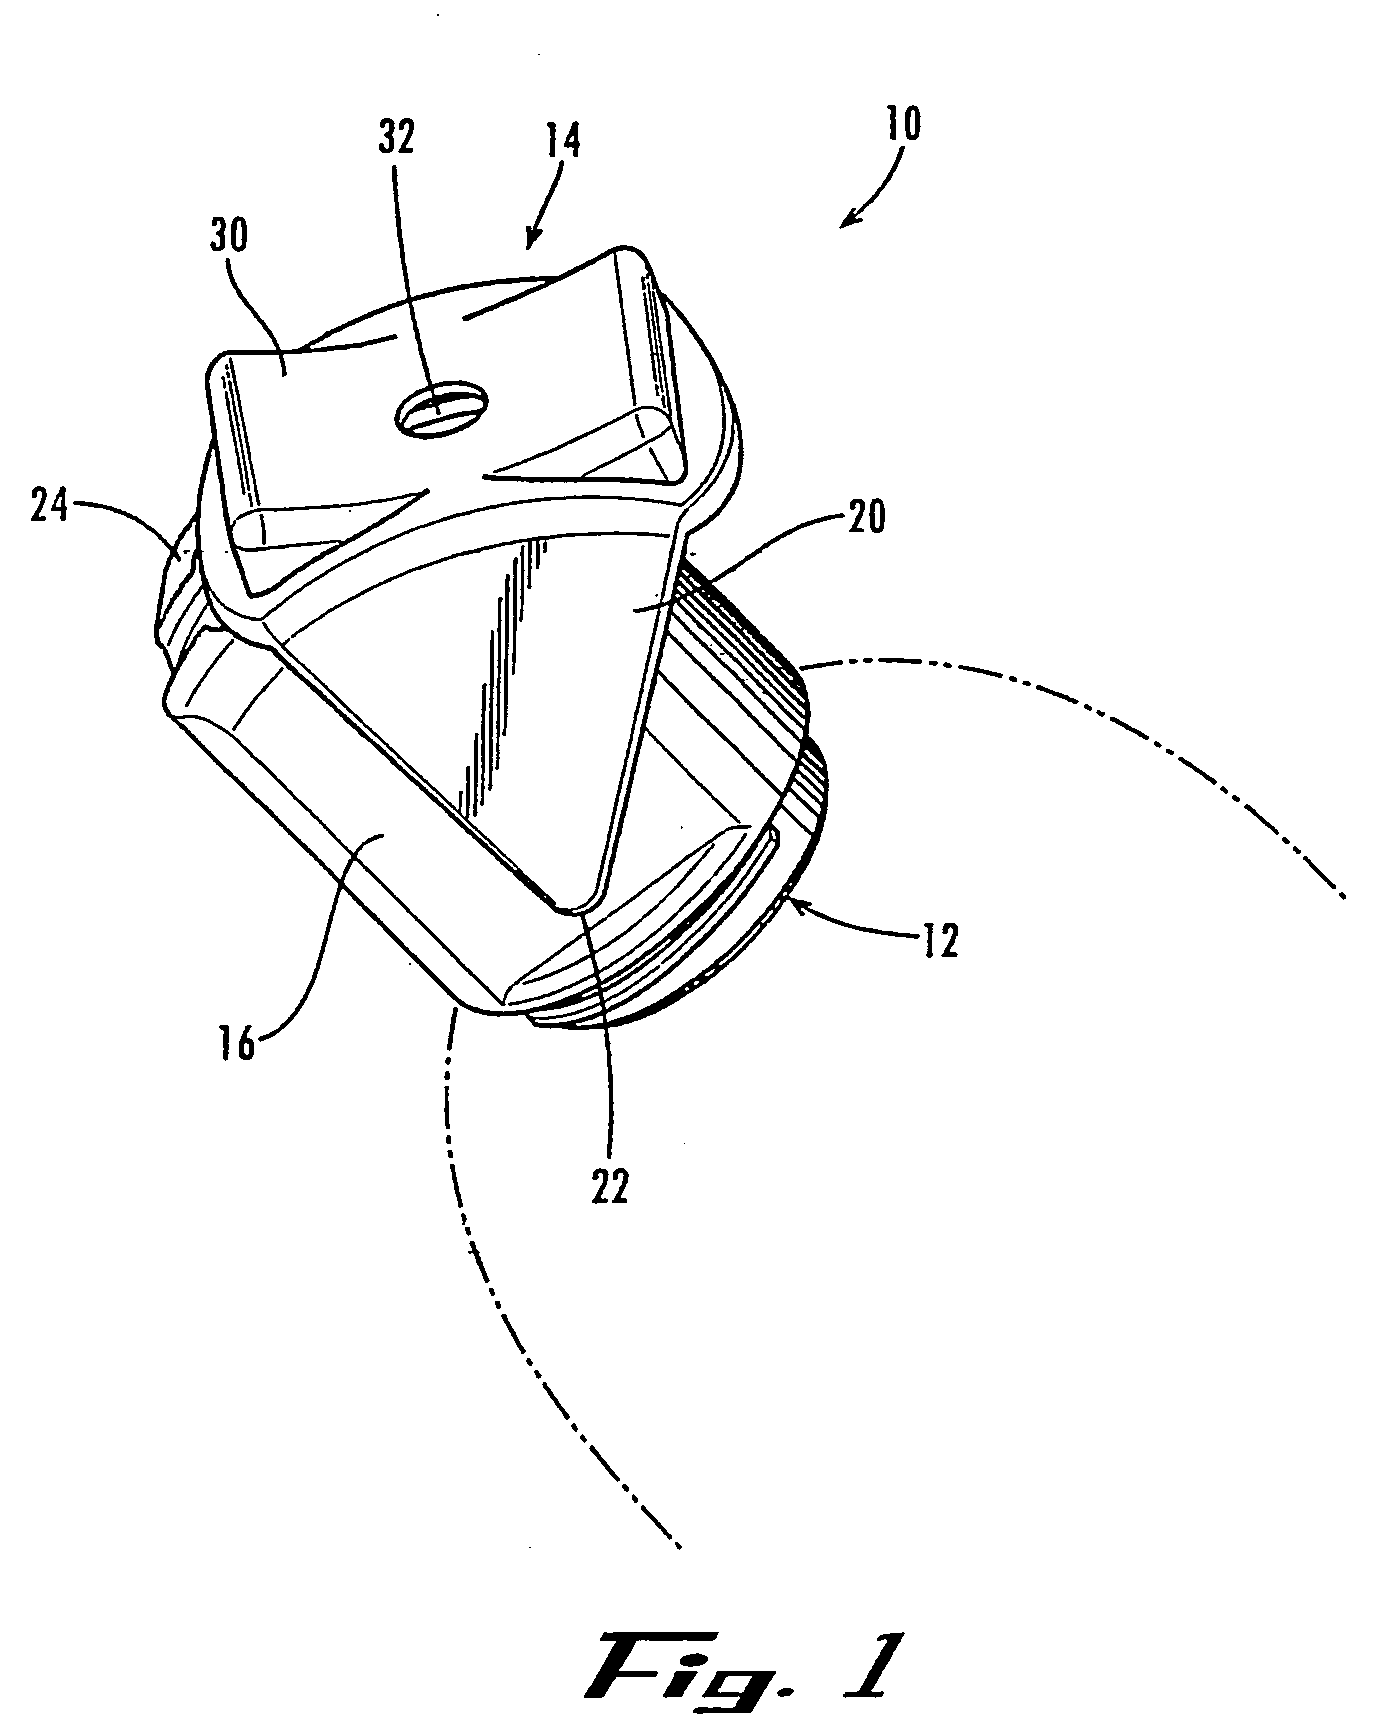 Lancing device with pivoting end cap